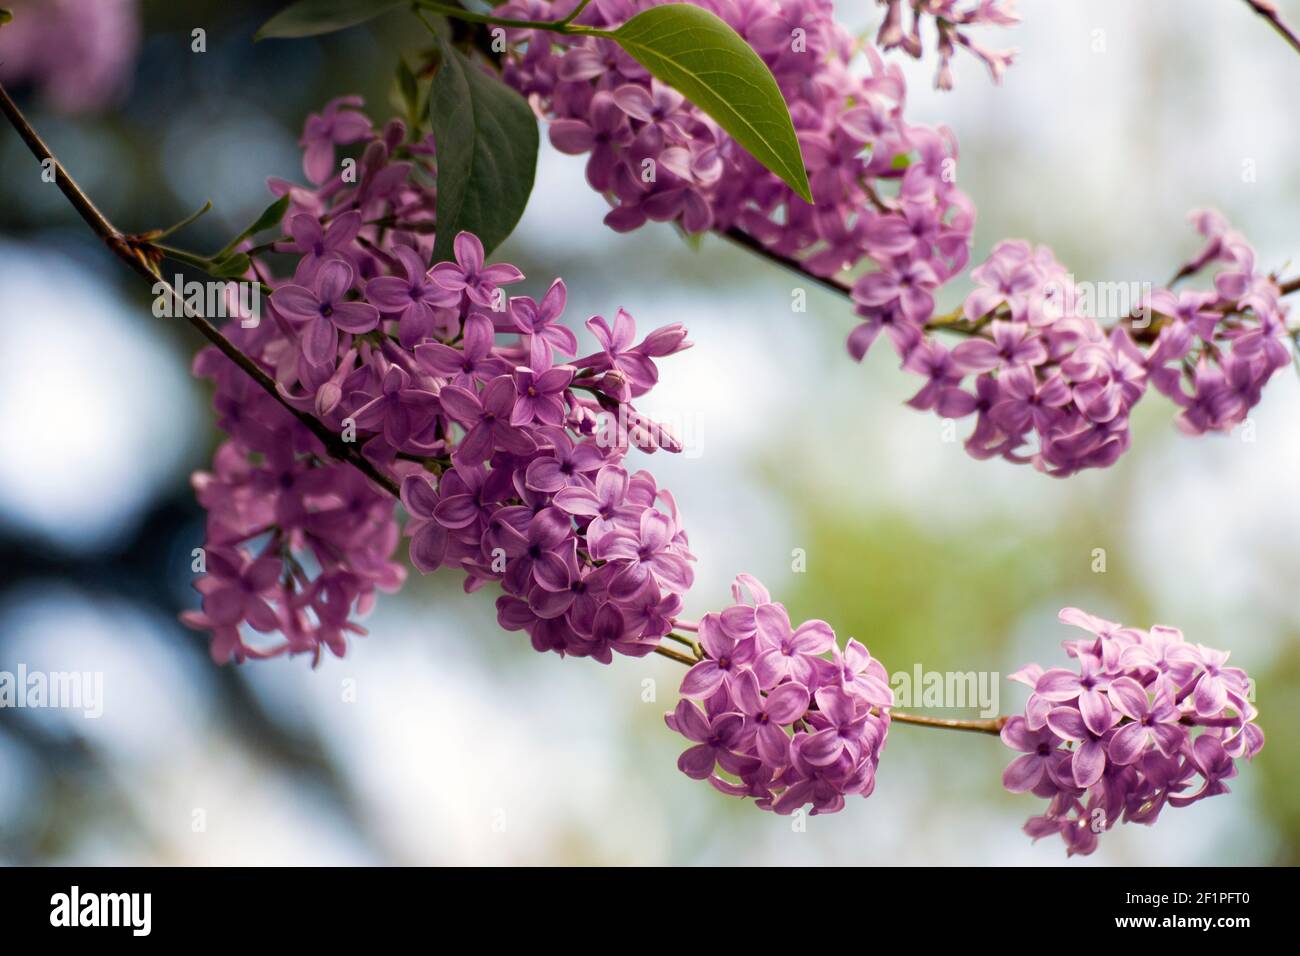 Light purple lilac. The lilac is a very popular ornamental plant in gardens and parks, because of its attractive, sweet-smelling flowers. Stock Photo